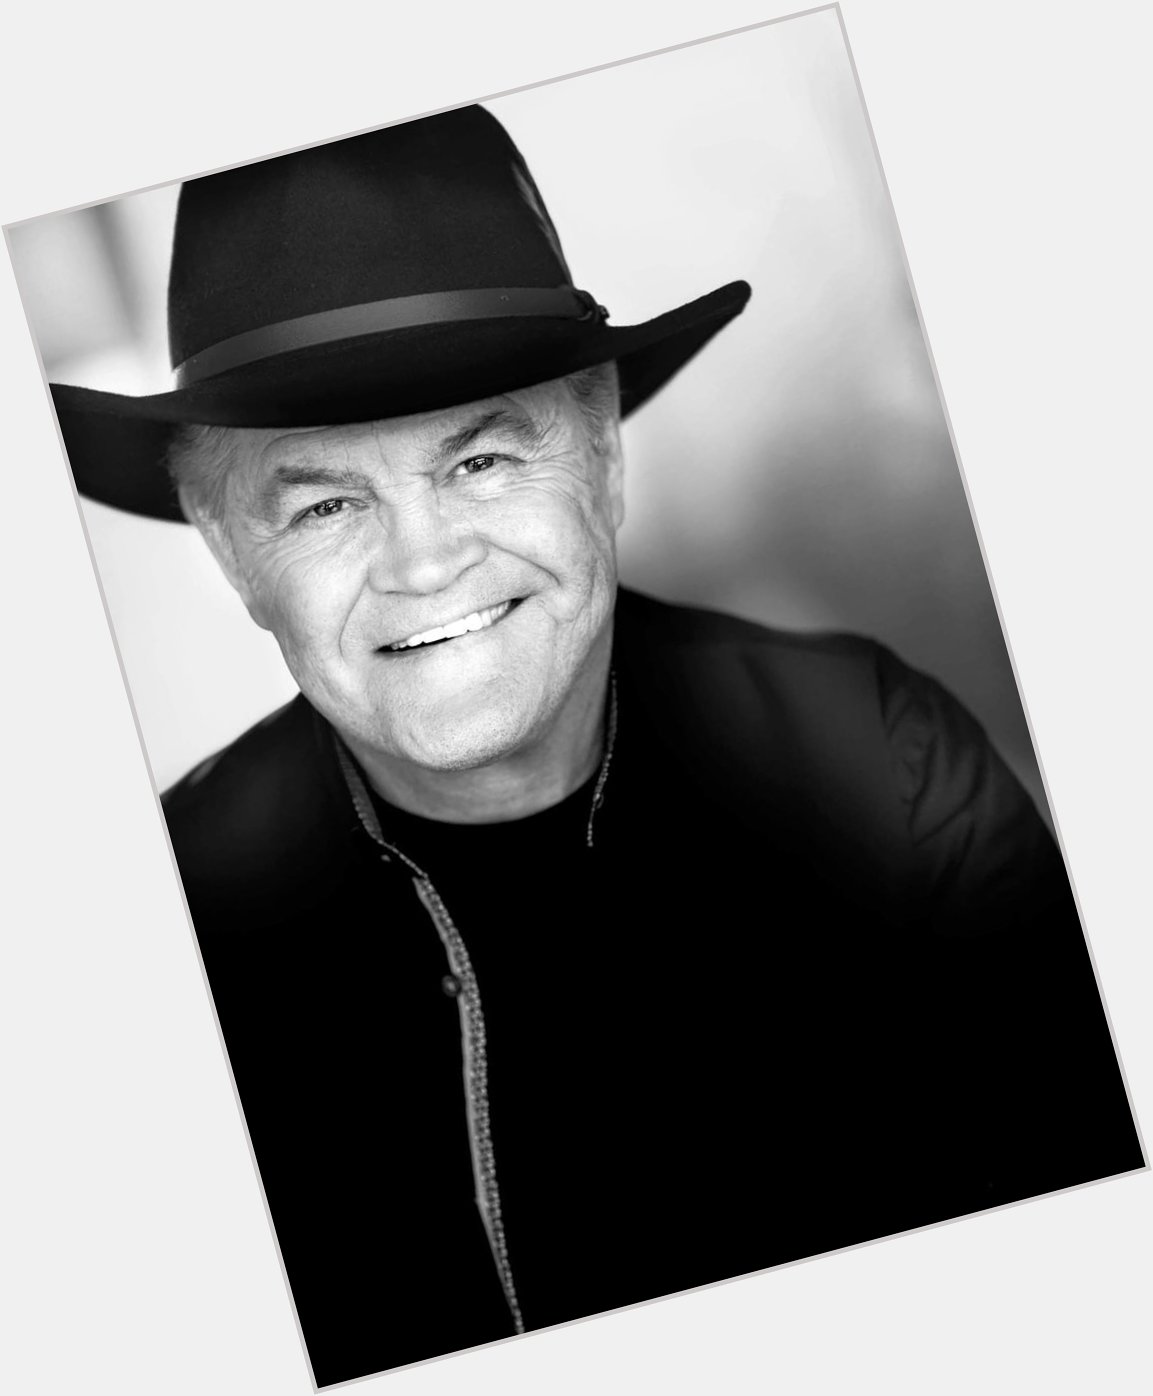 Happy Birthday to Micky Dolenz who turns 77 today! 